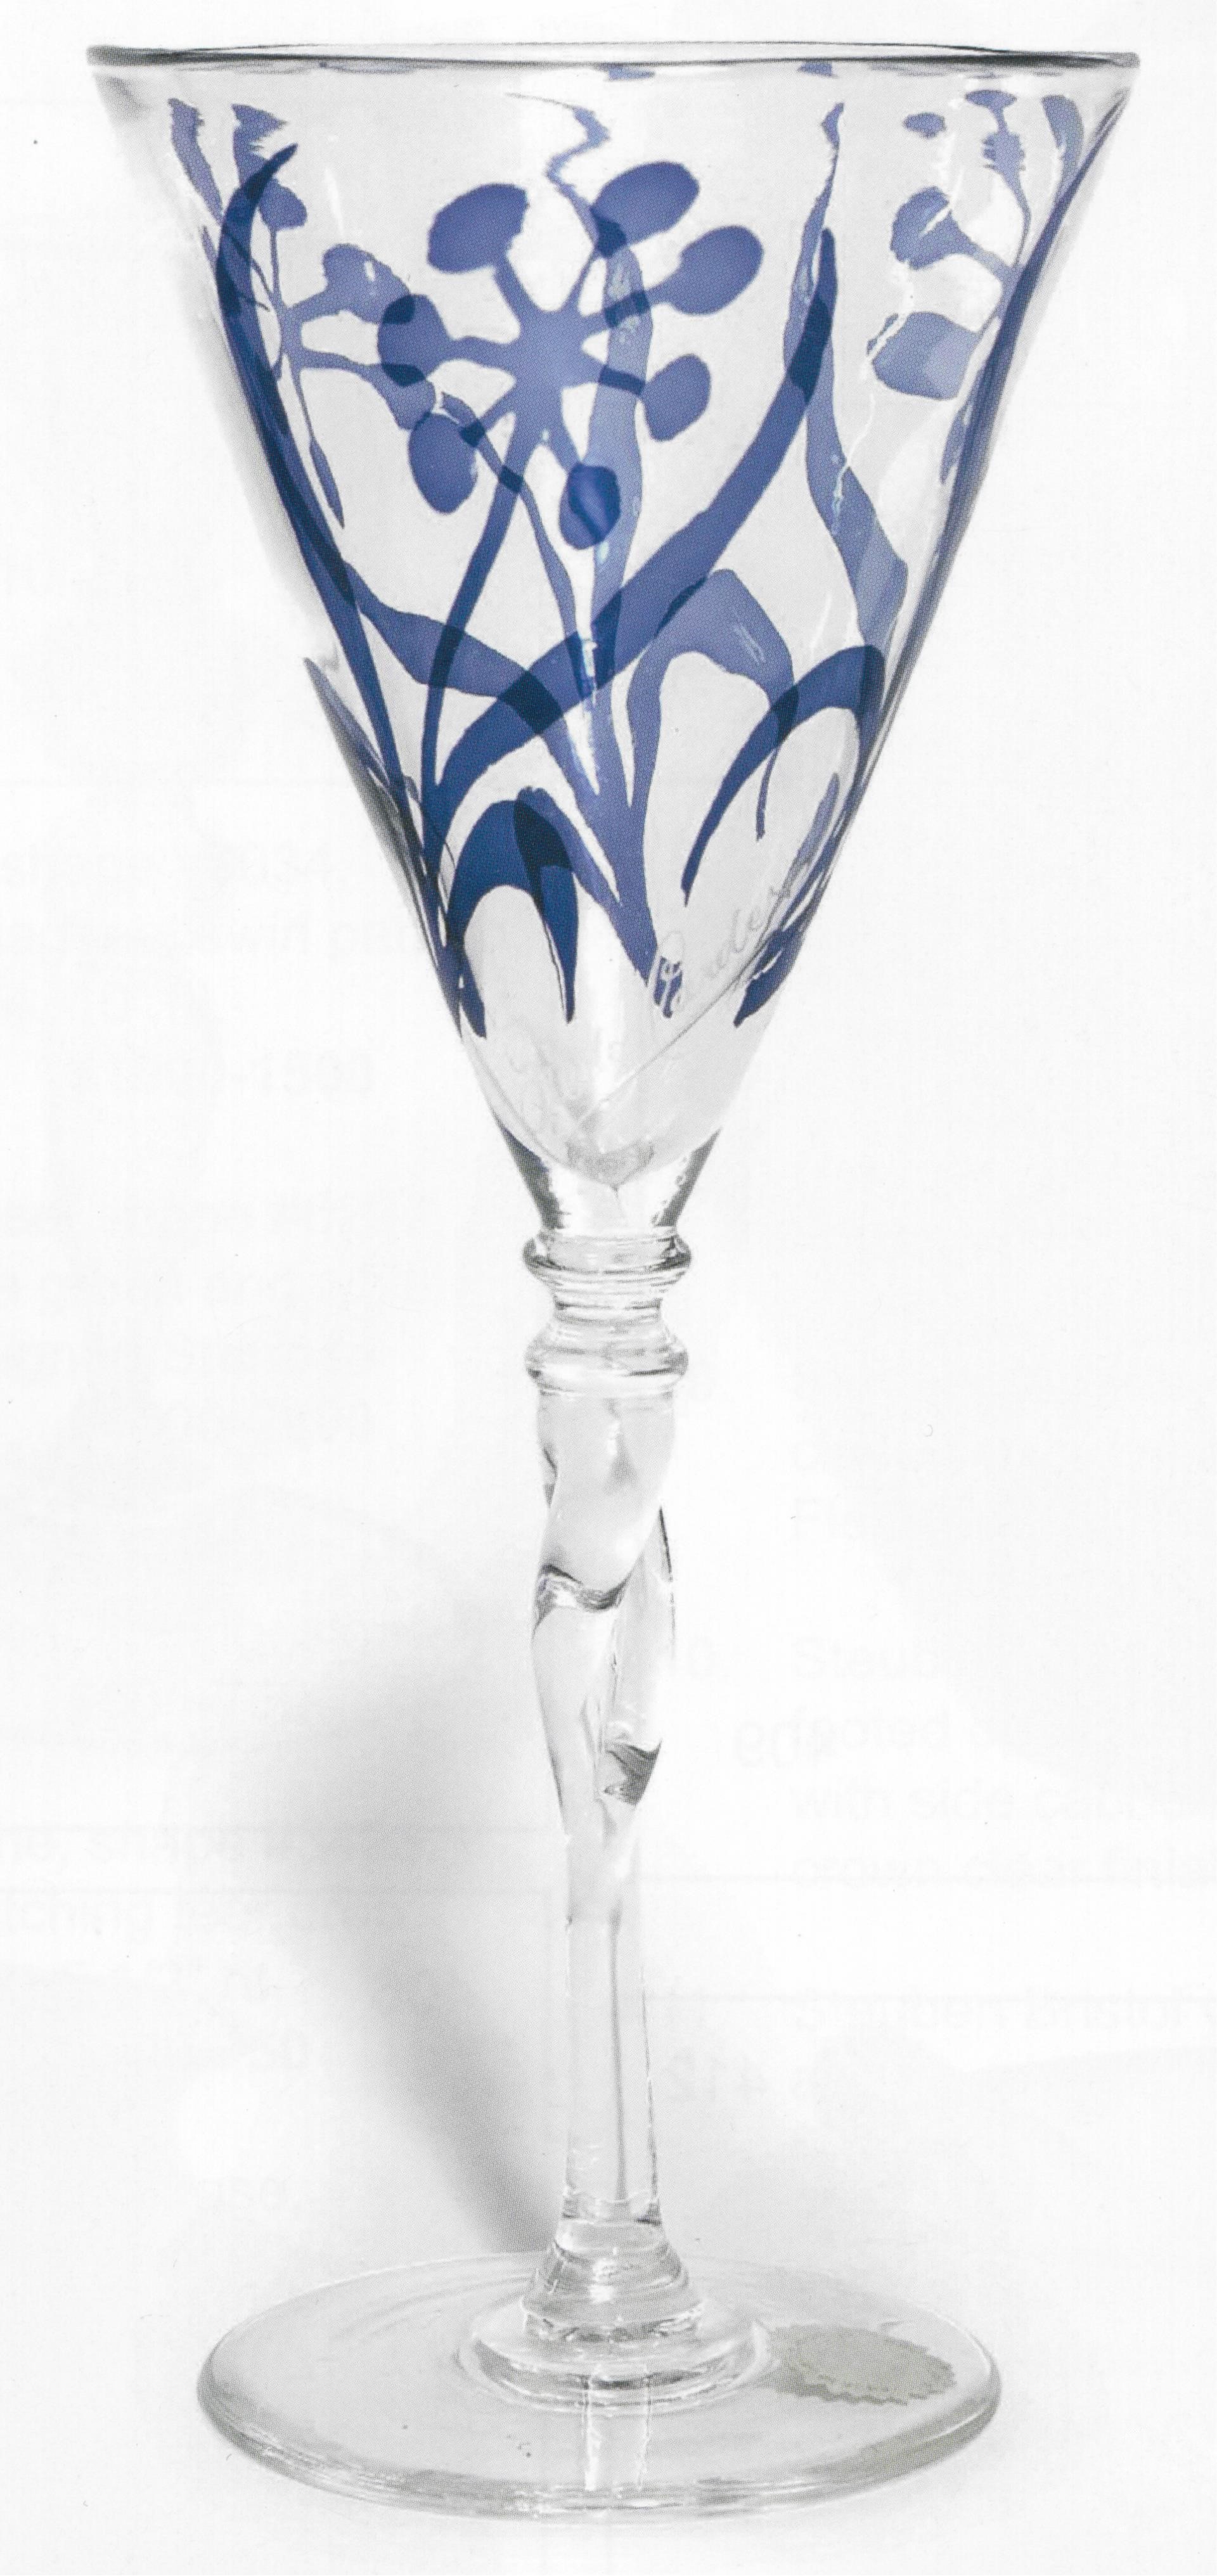 0 - Colorless Intarsia Goblet